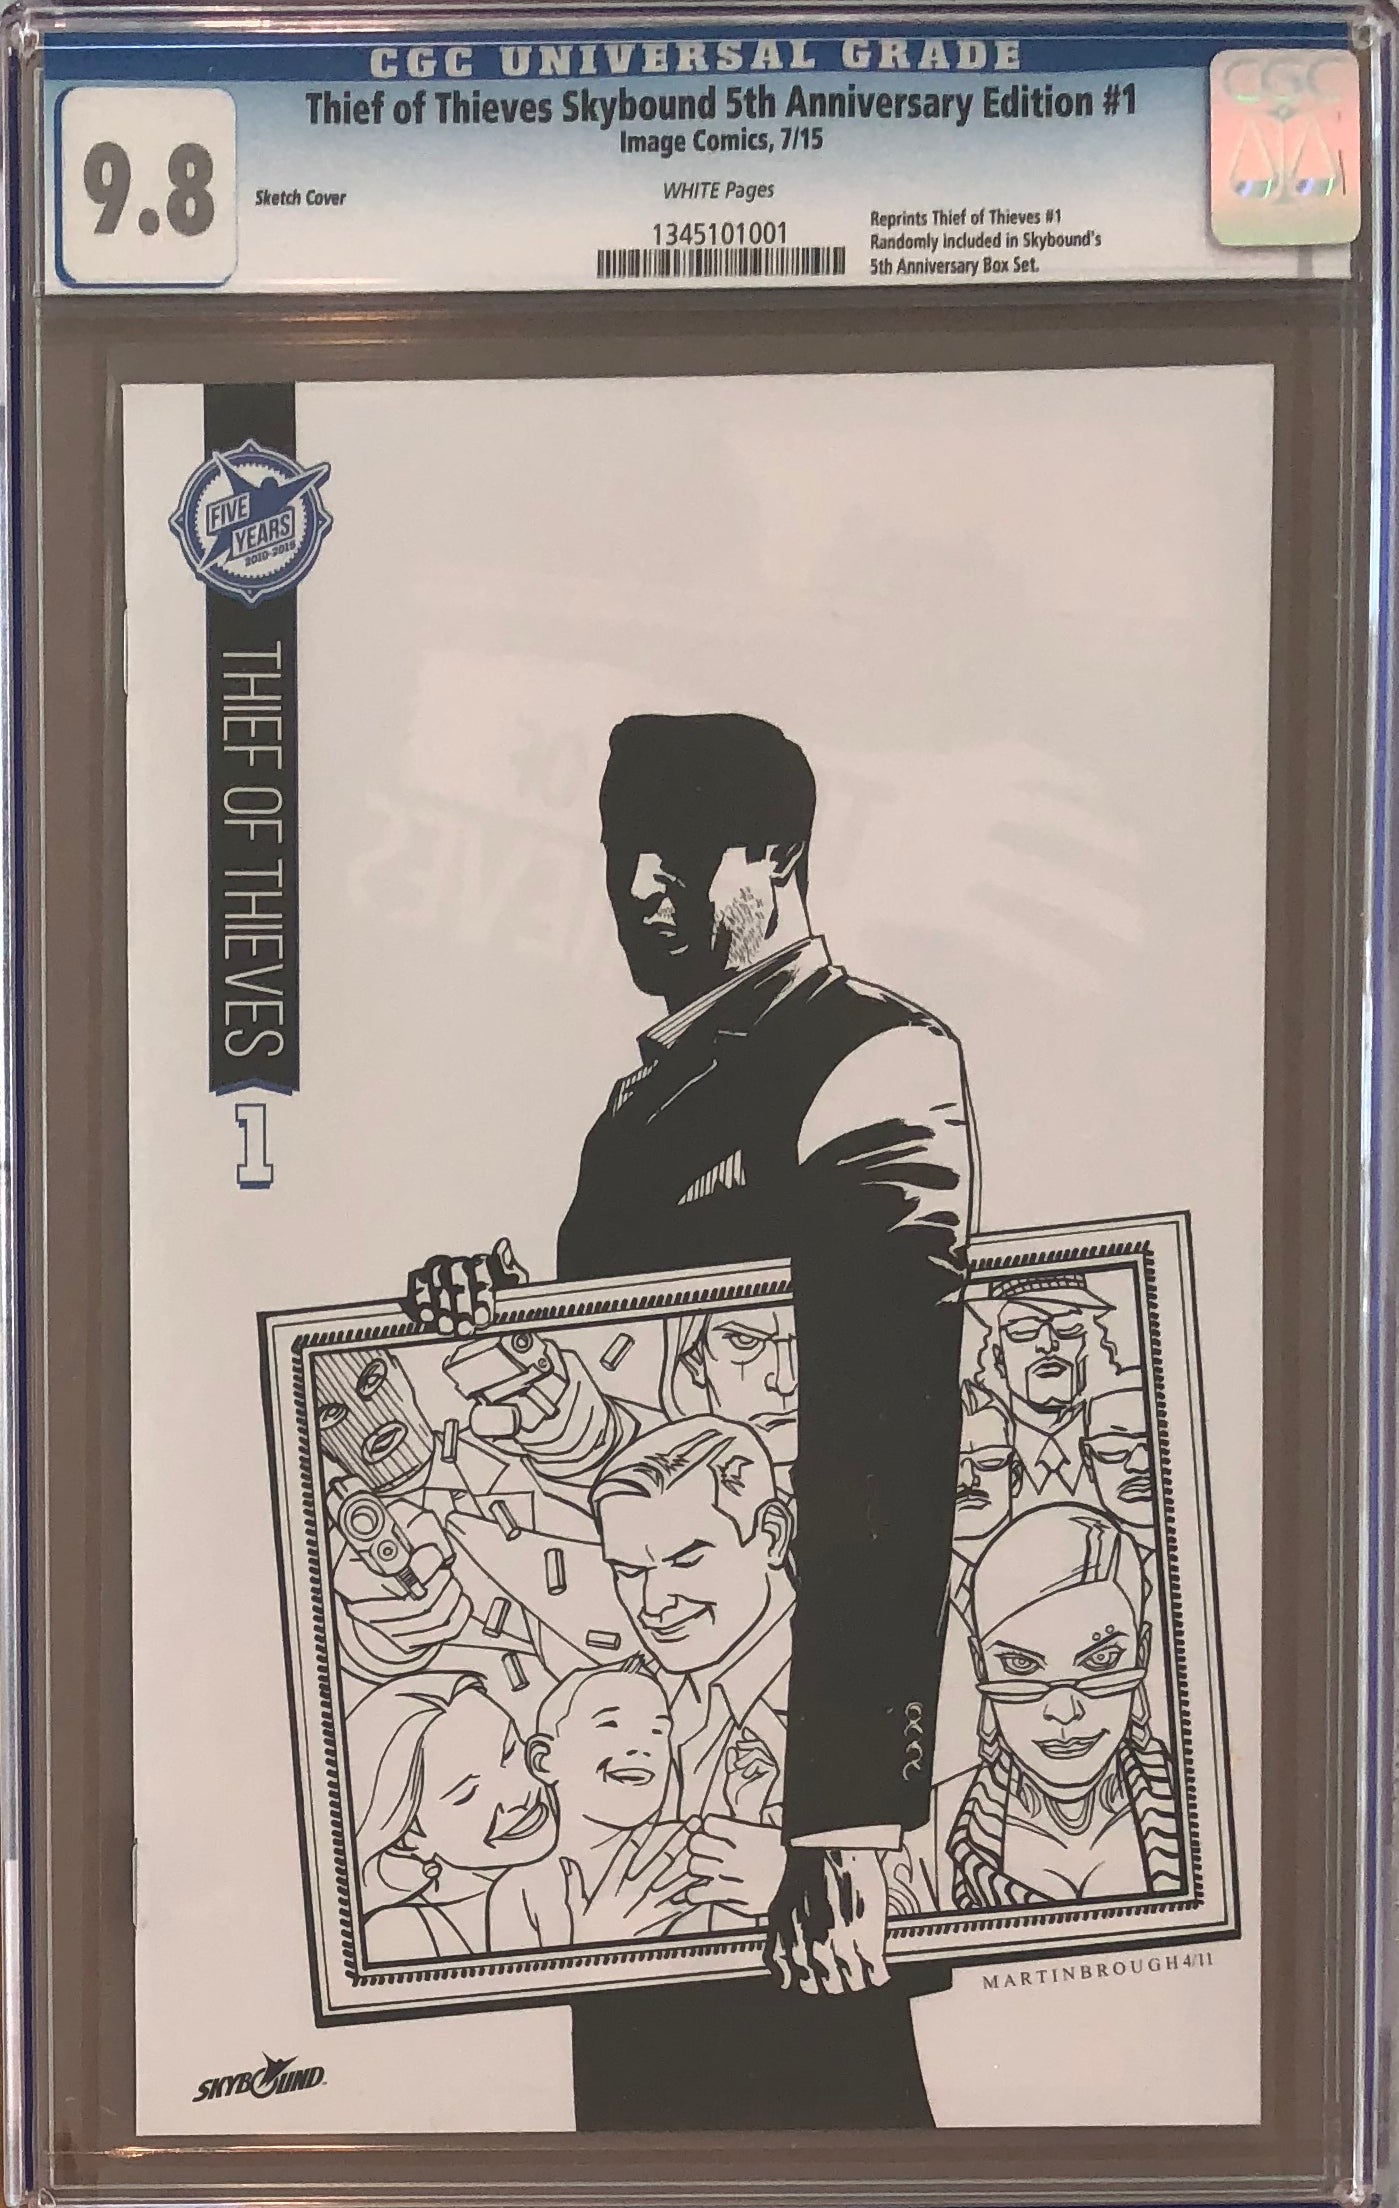 Thief of Thieves #1 Skybound 5th Anniversary Sketch Cover CGC 9.8